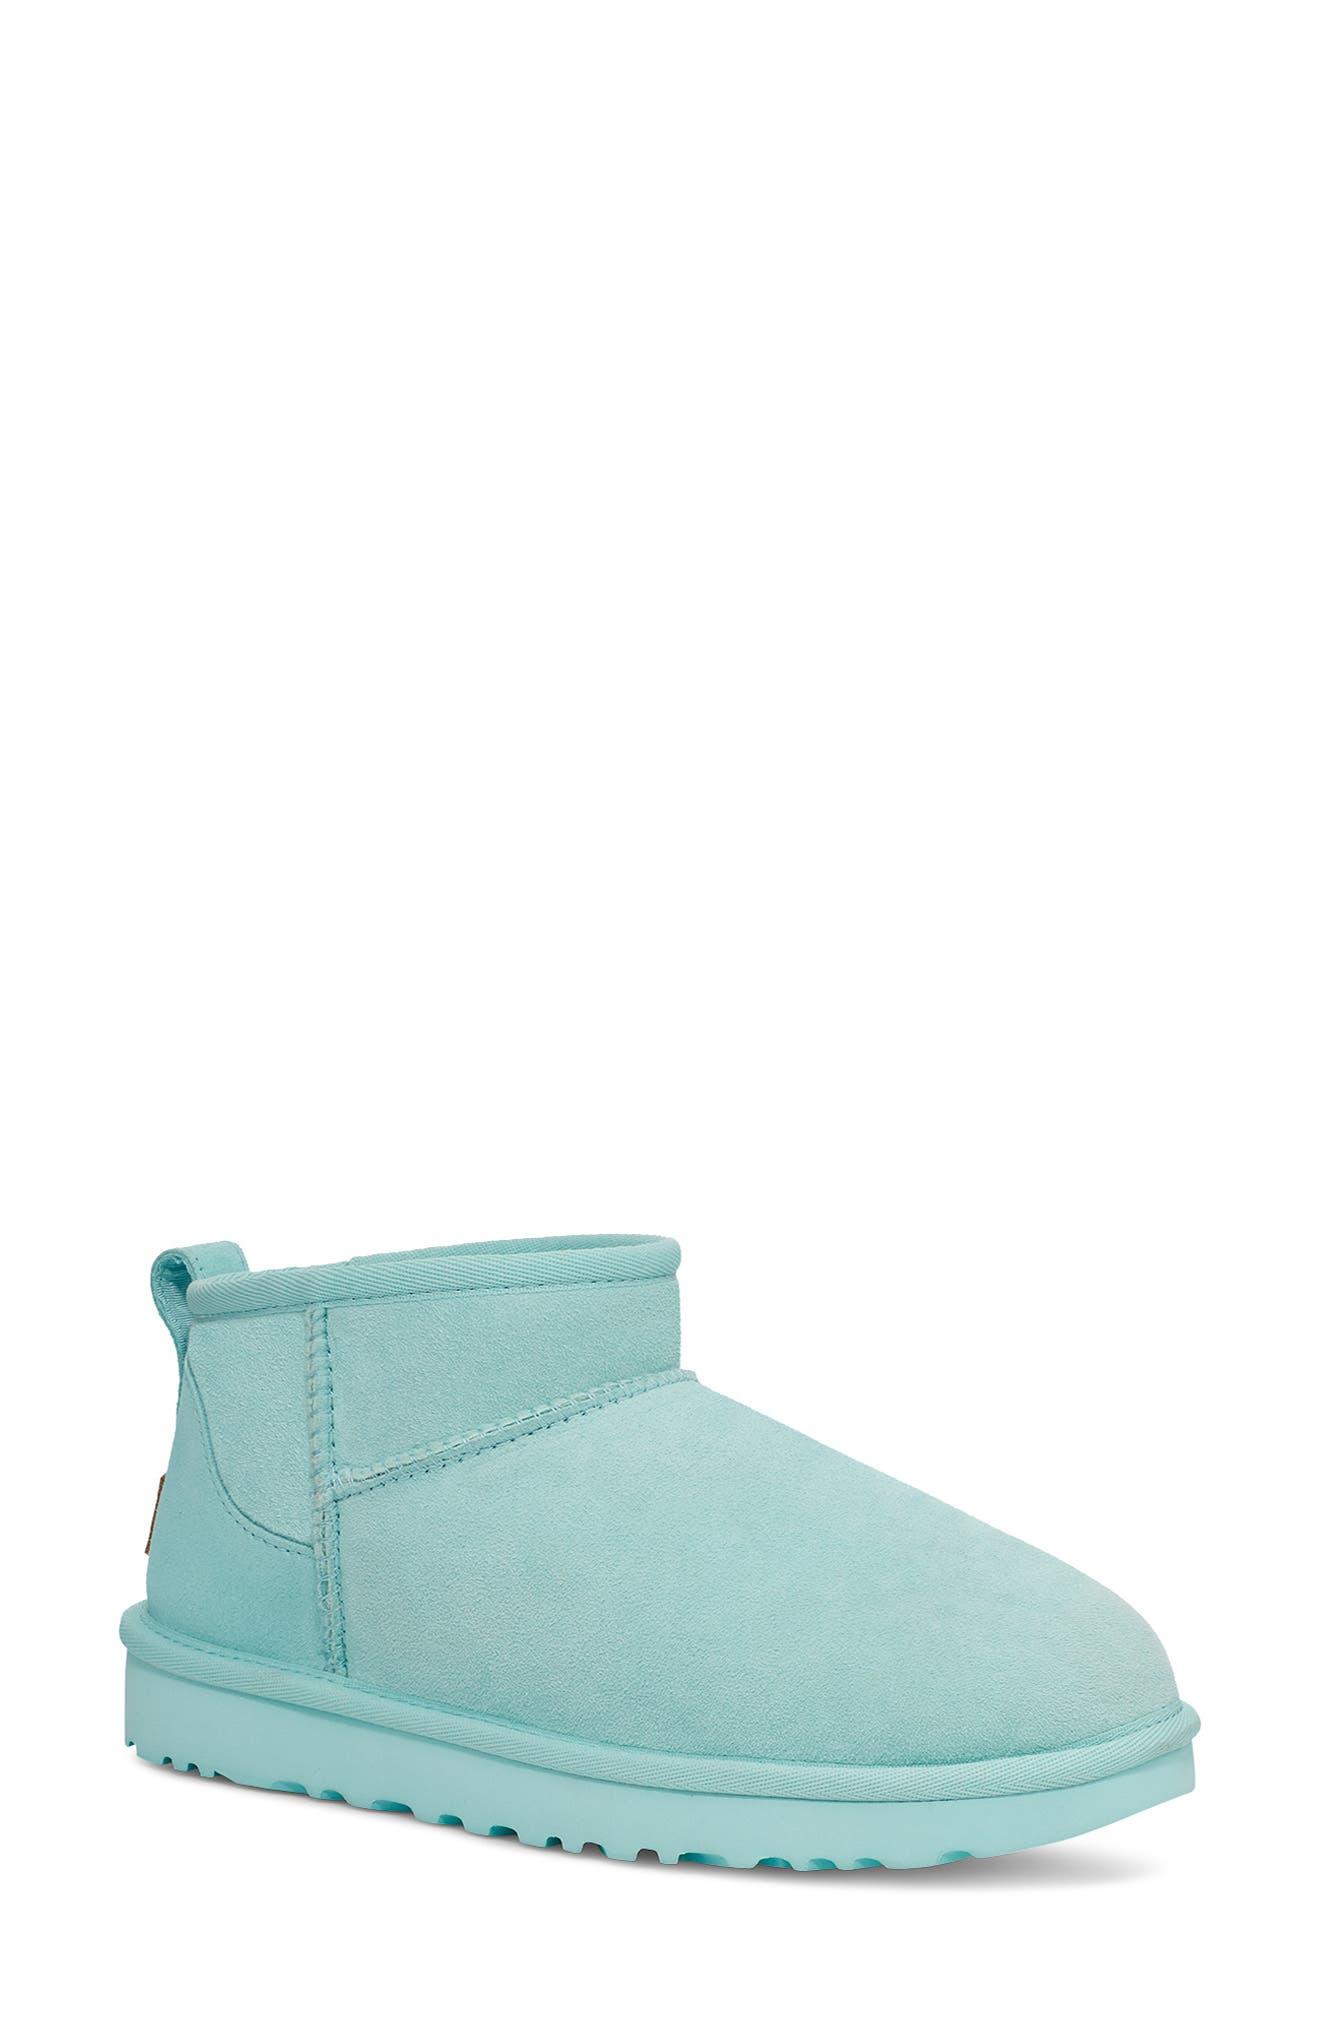 UGG Wool Ultra Mini Classic Boot In Sky At Nordstrom Rack in Blue | Lyst